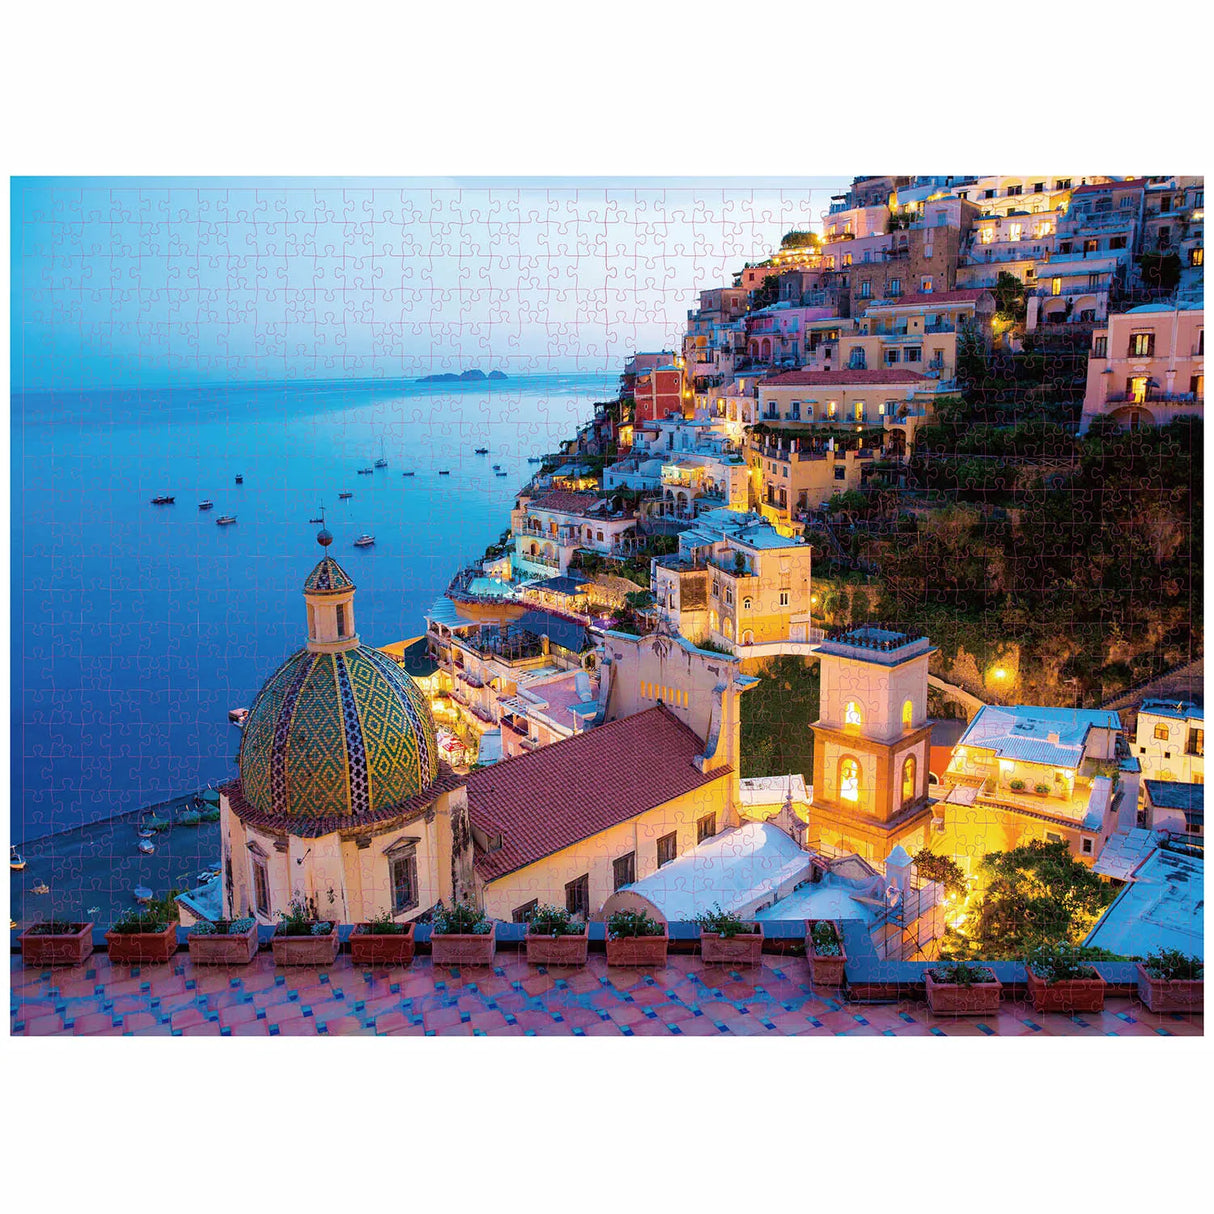 1000-piece Positano jigsaw puzzle featuring a stunning evening view of the colorful coastal town, with buildings cascading down the hillside towards the sea.